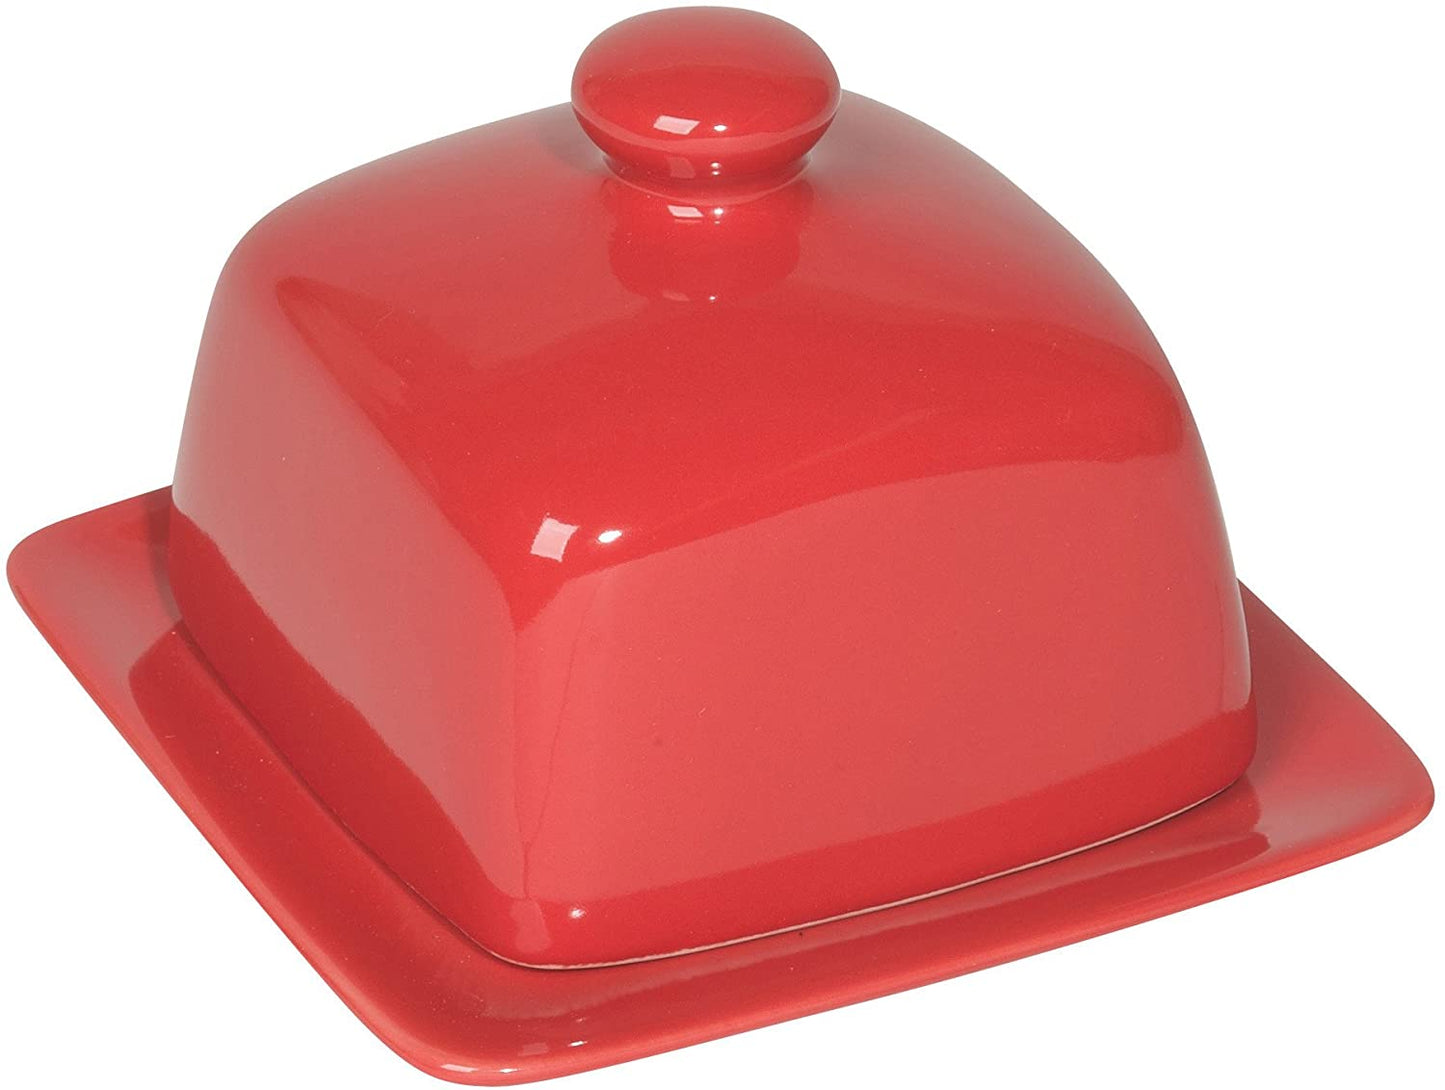 Red Square Butter Dish